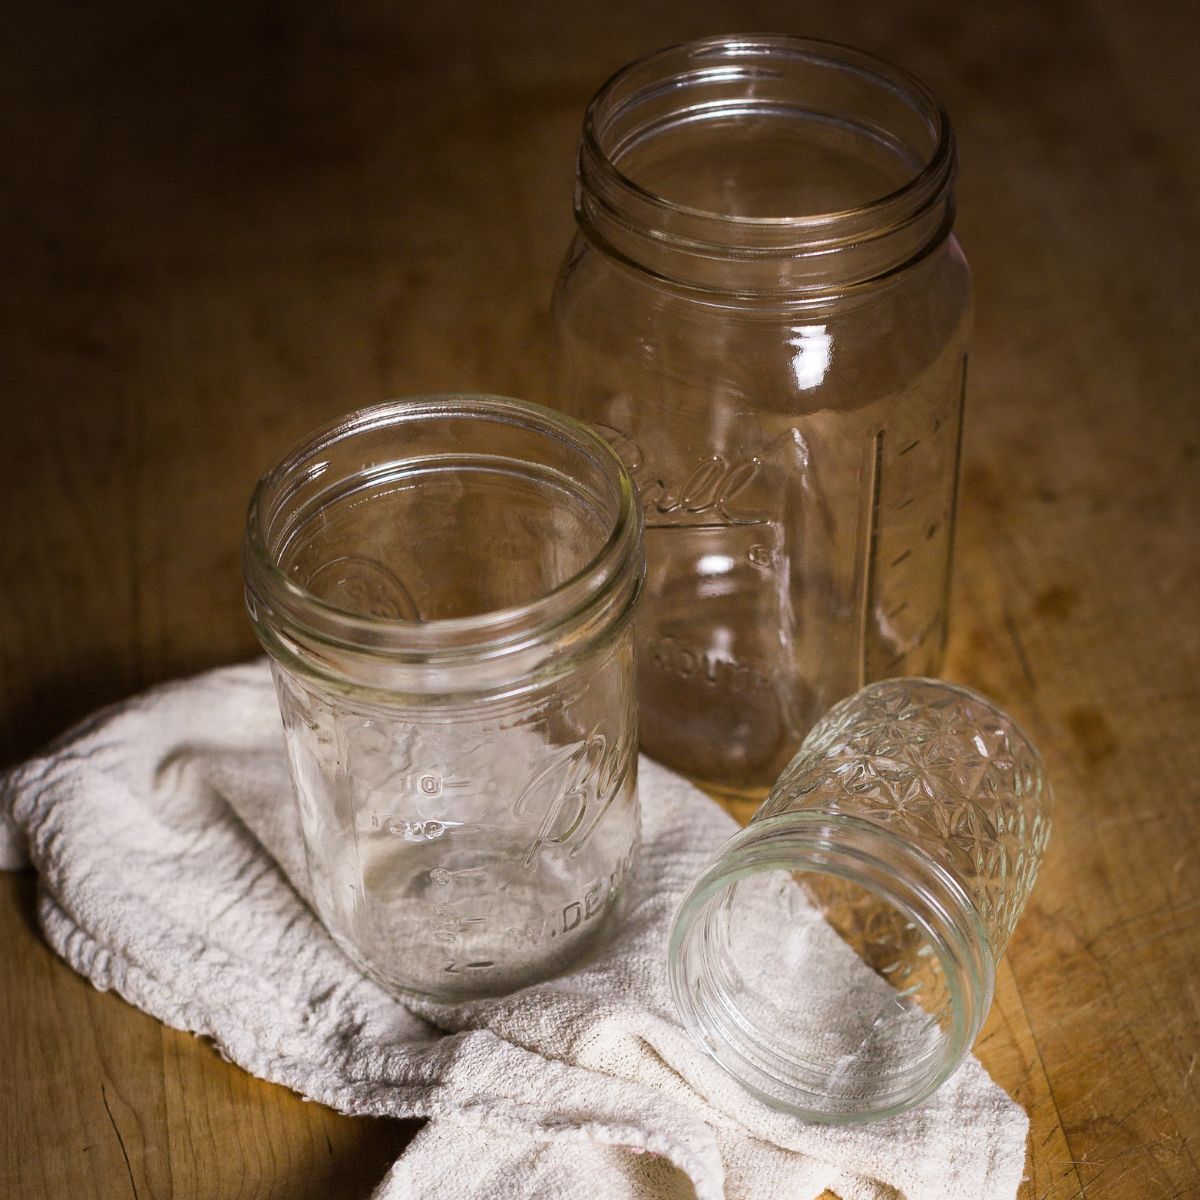 How to Store & Freeze Leftovers in Mason Jars Safely